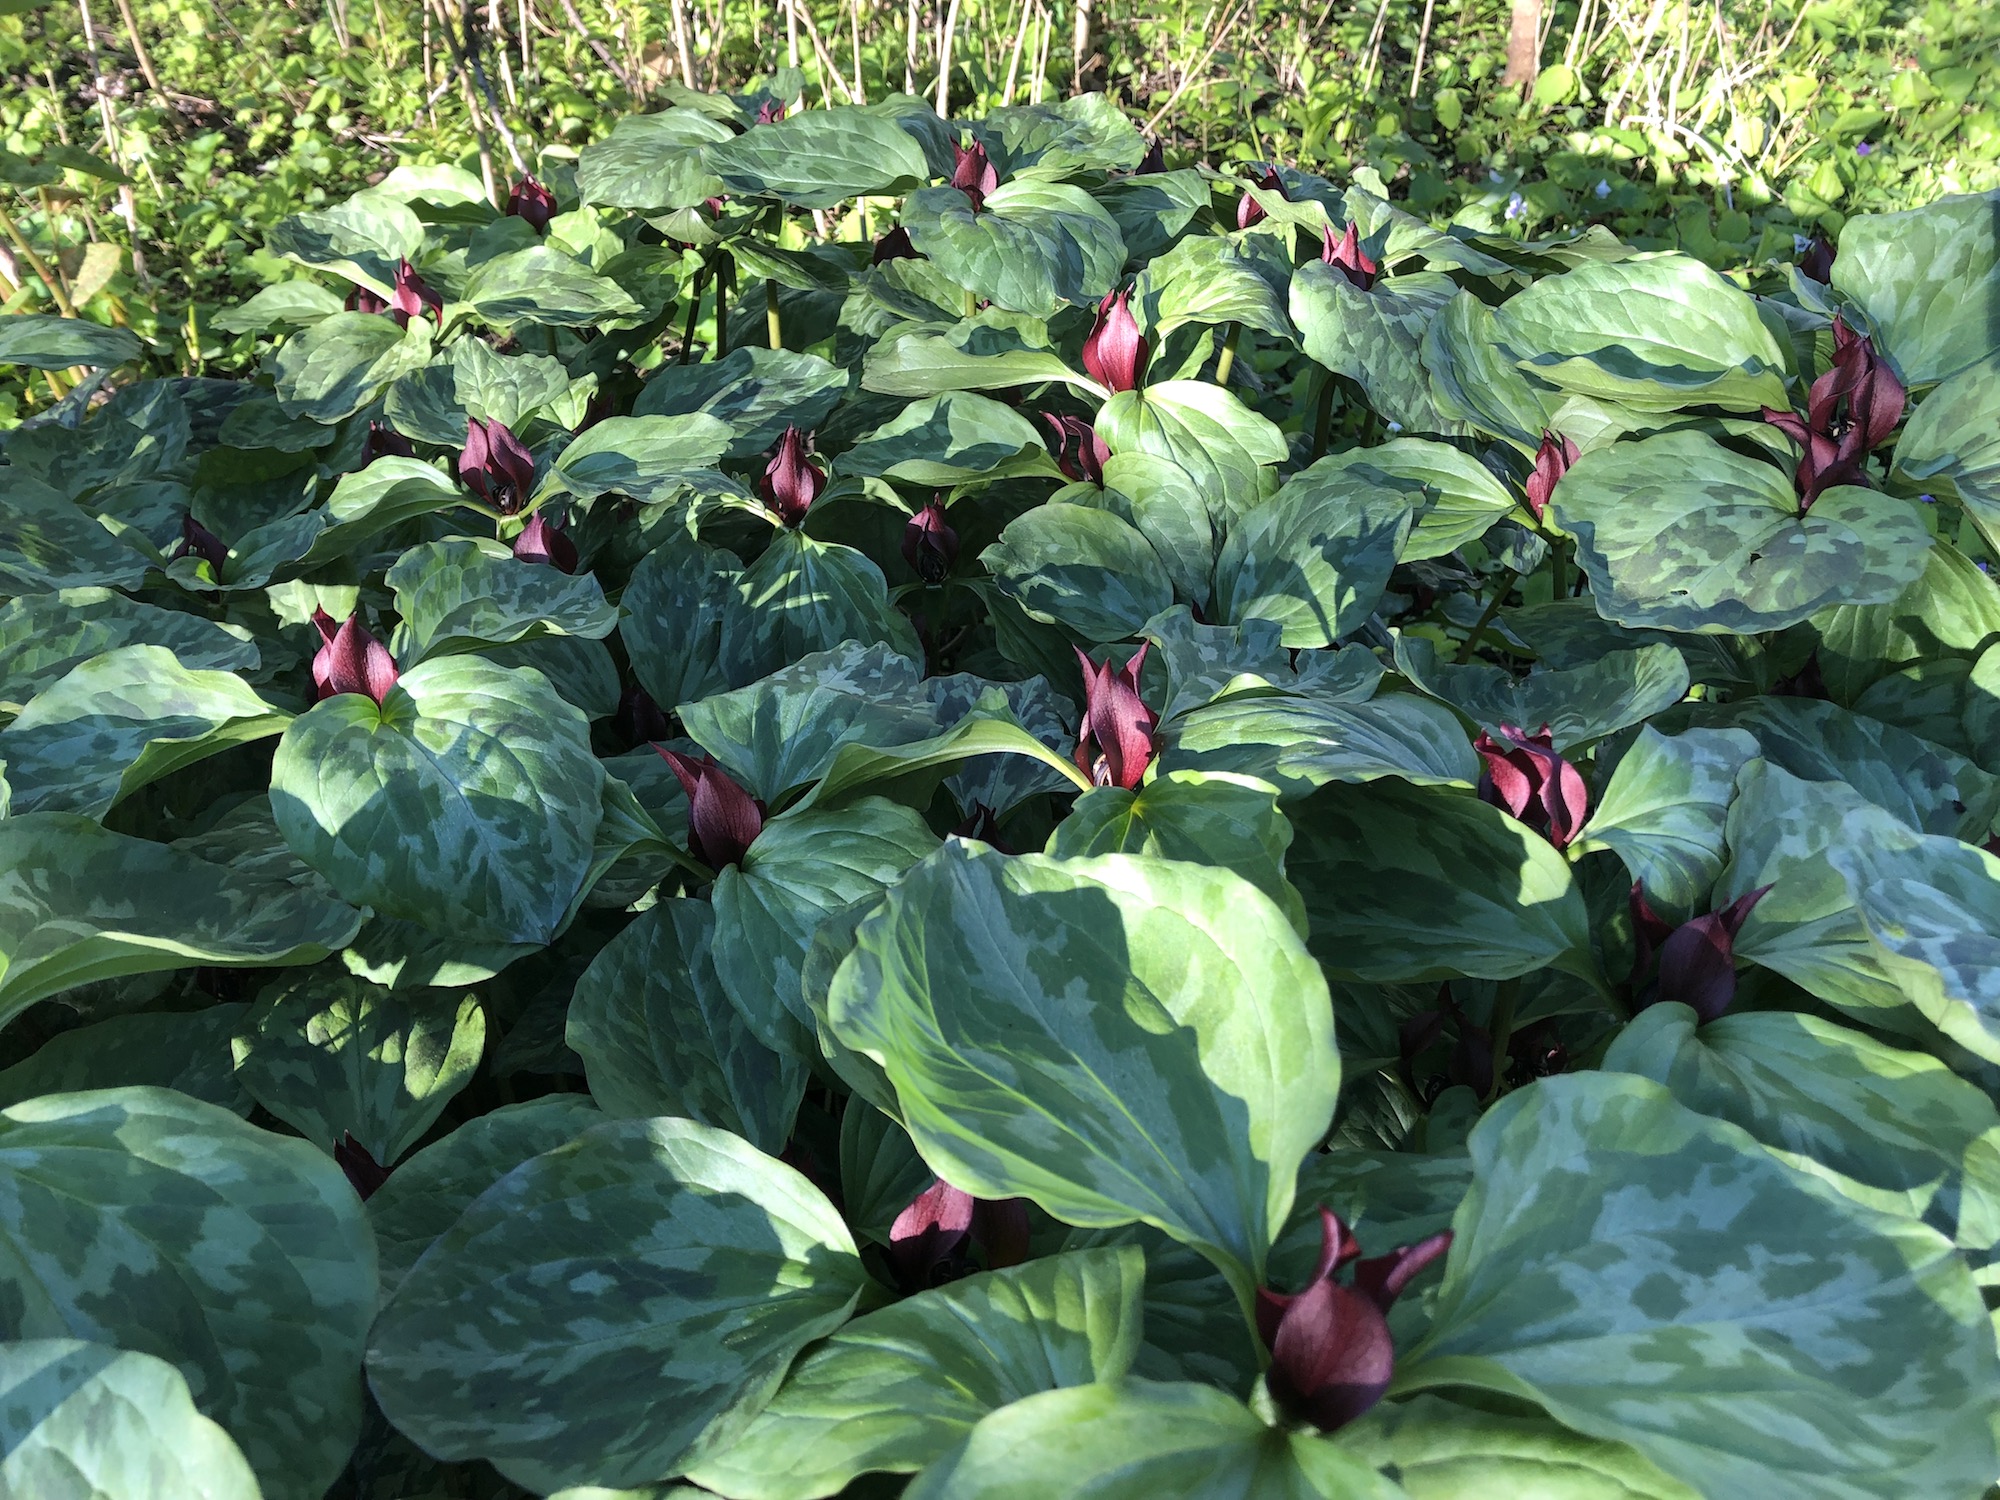 Trillium off of bike path between Marion Dunn and Duck Pond on May 10, 2019.